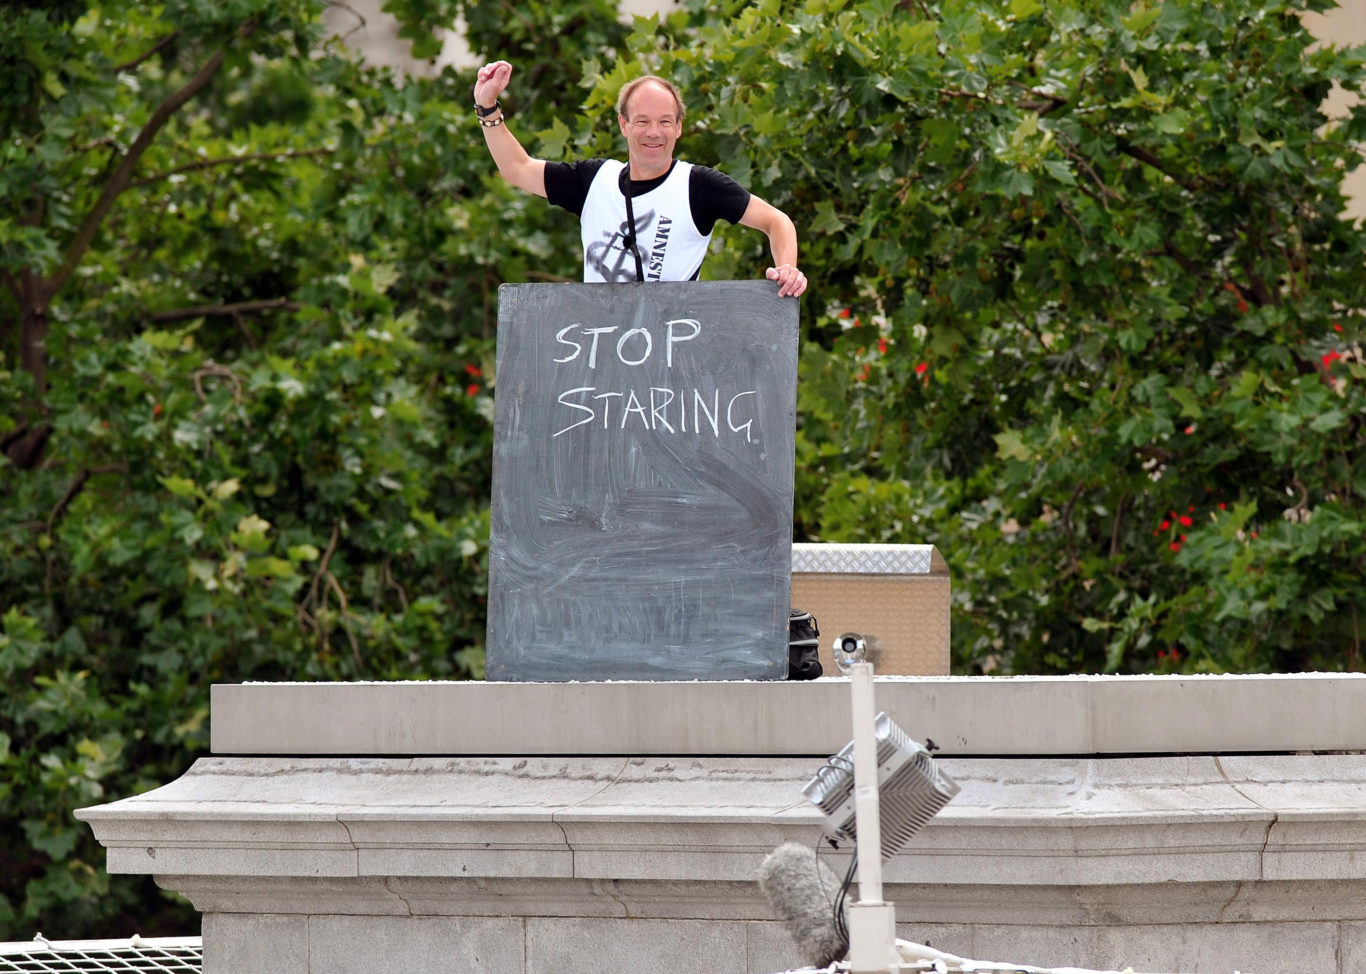 In 2009, Steve Pratt was one of a number of people to stand on the fourth plinth for an hour as part of the One and Other art installation (John Stillwell/PA)